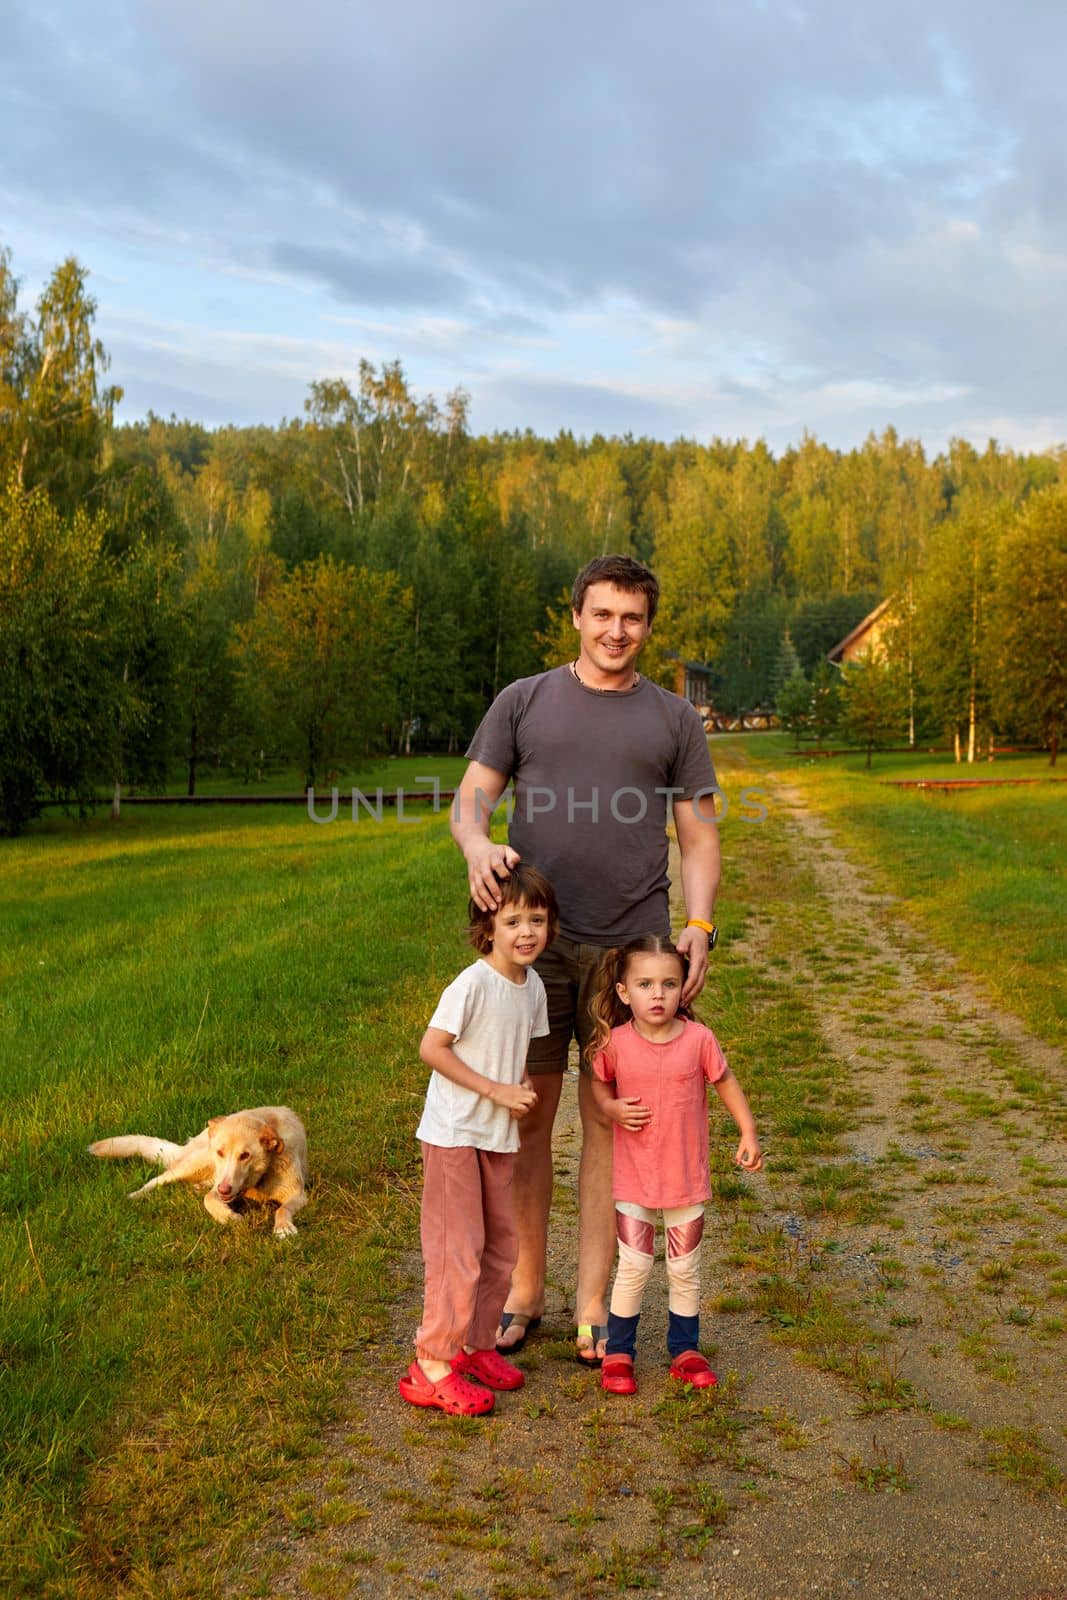 Father with kids and dog on countryside road by Demkat